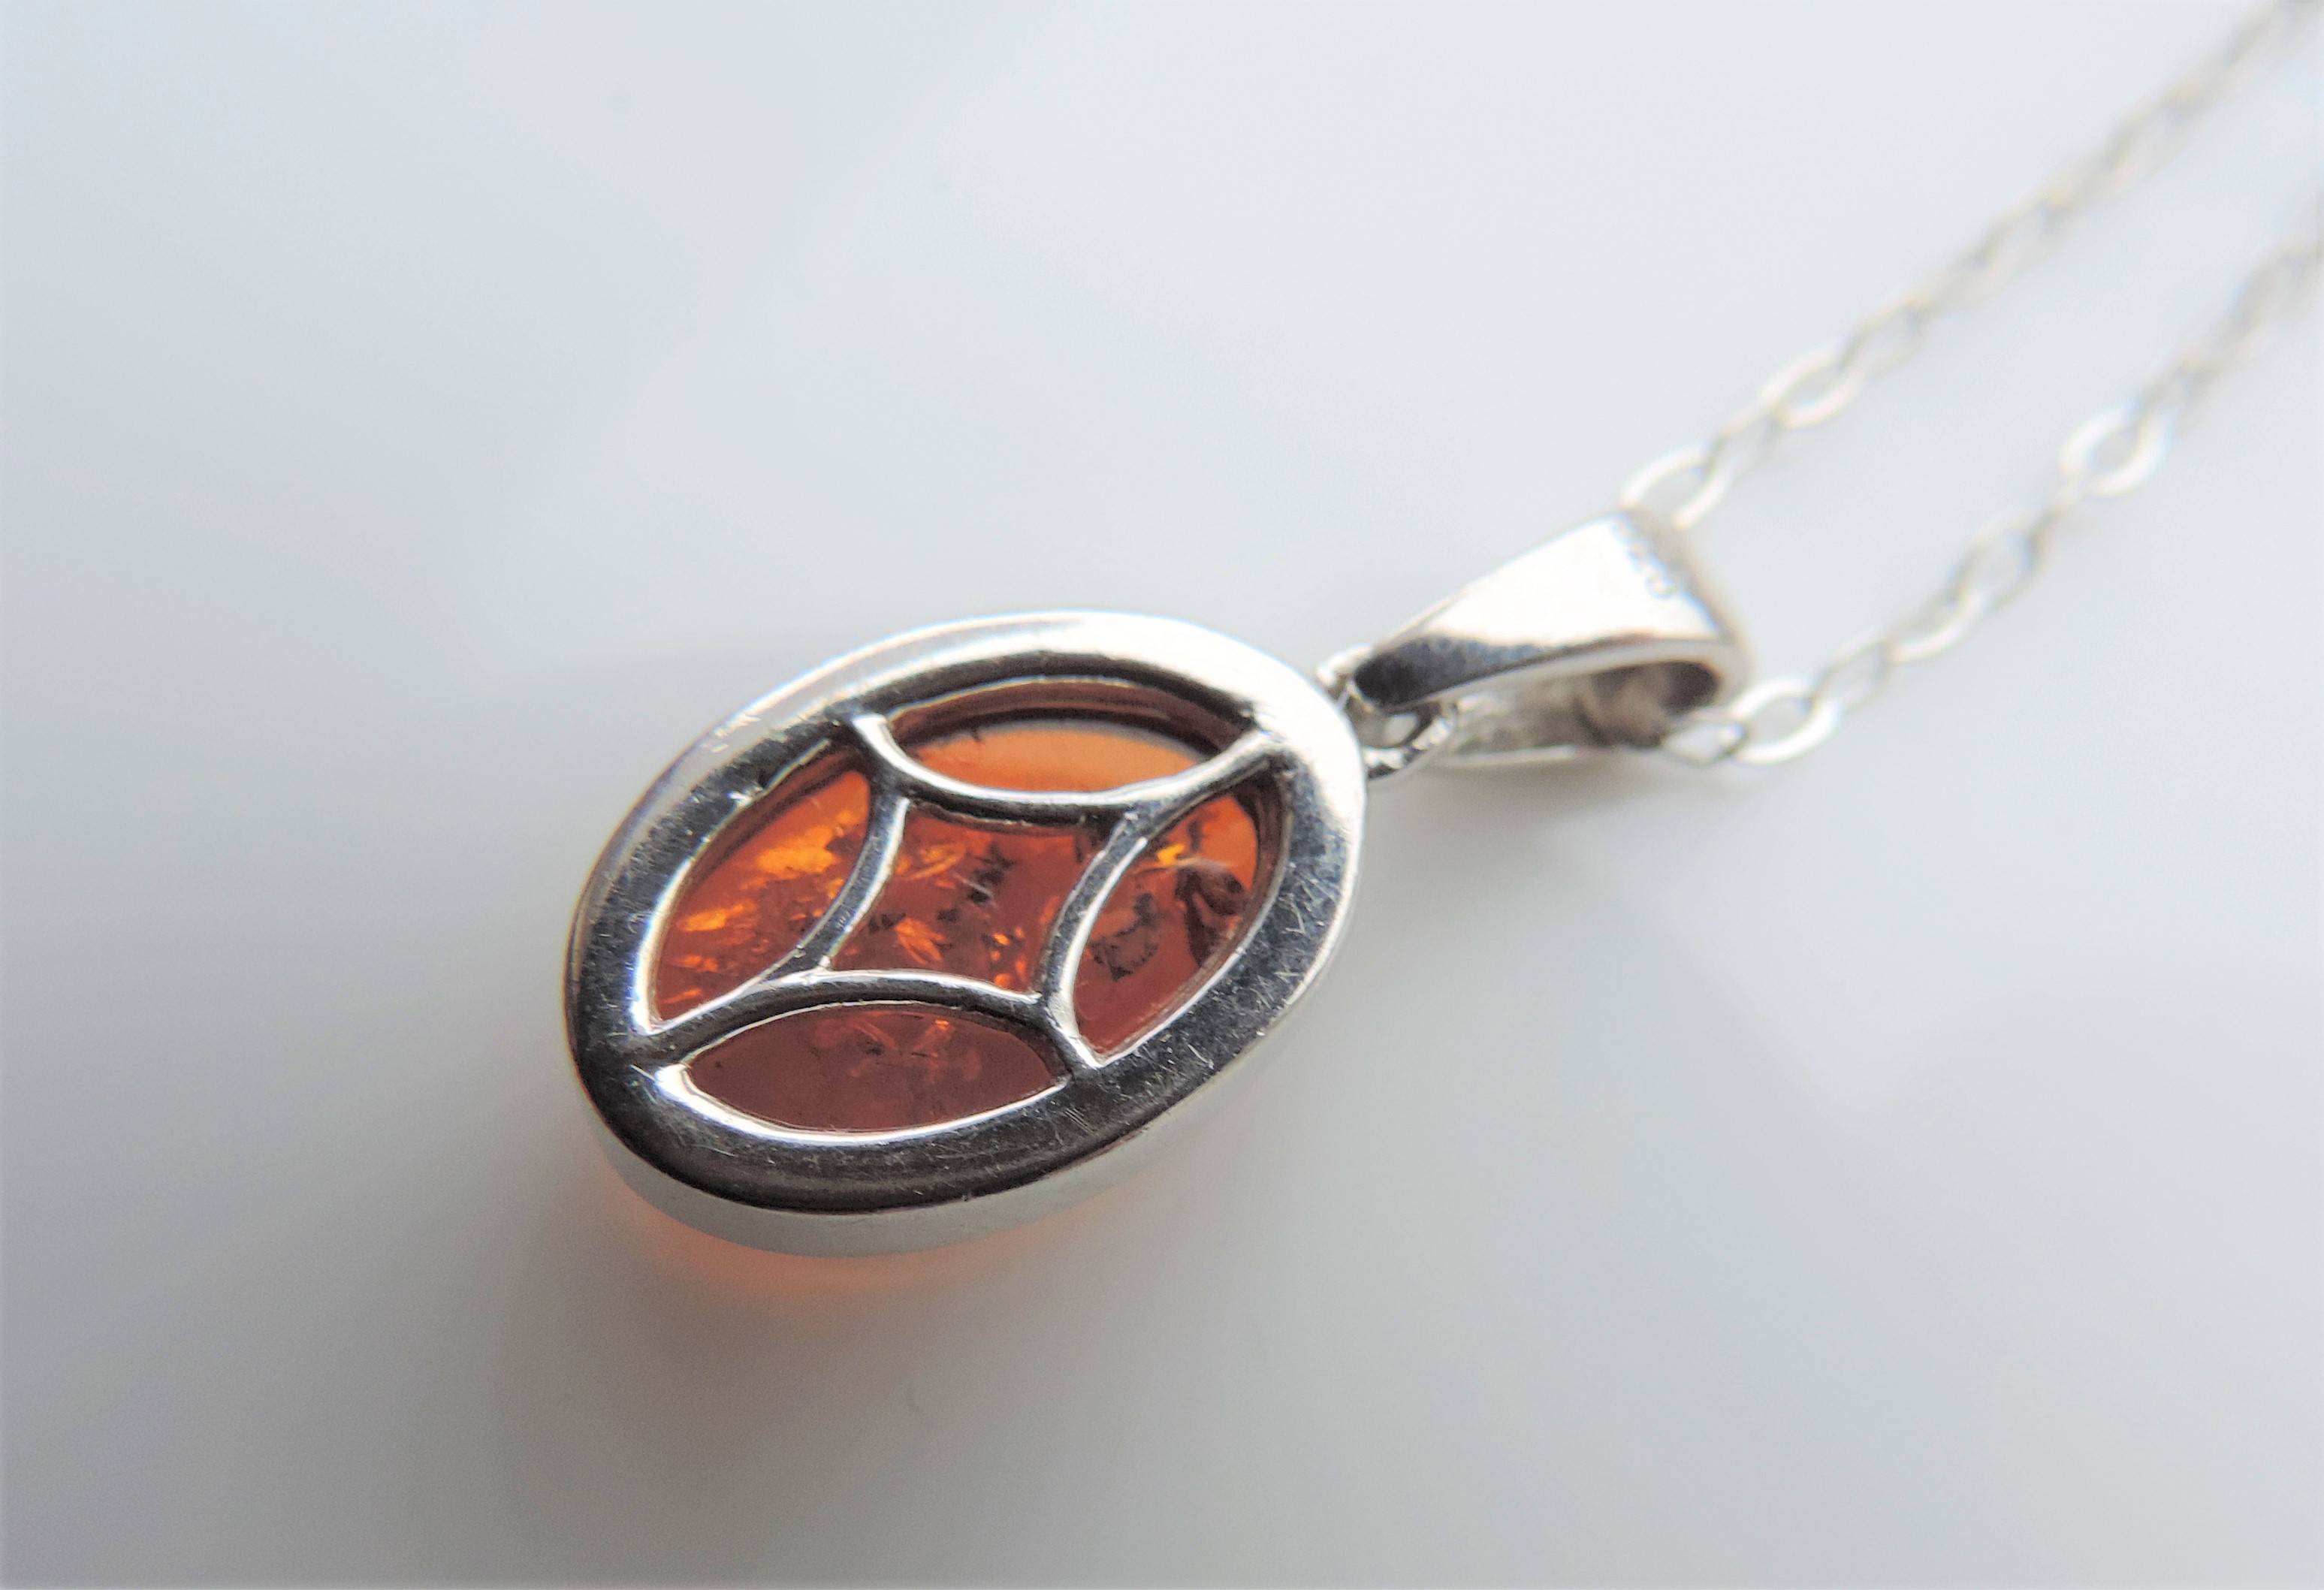 Sterling Silver Baltic Amber Pendant Necklace - Image 3 of 3